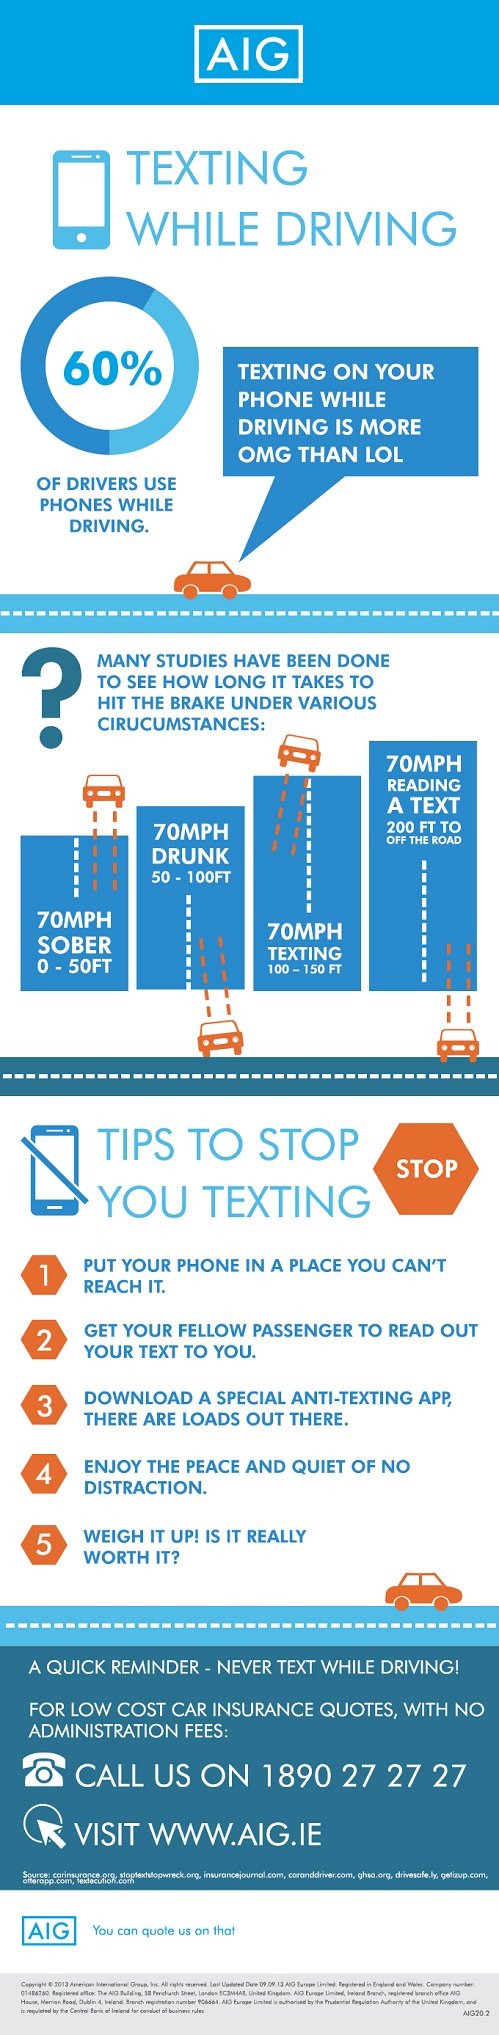 text while driving infographic